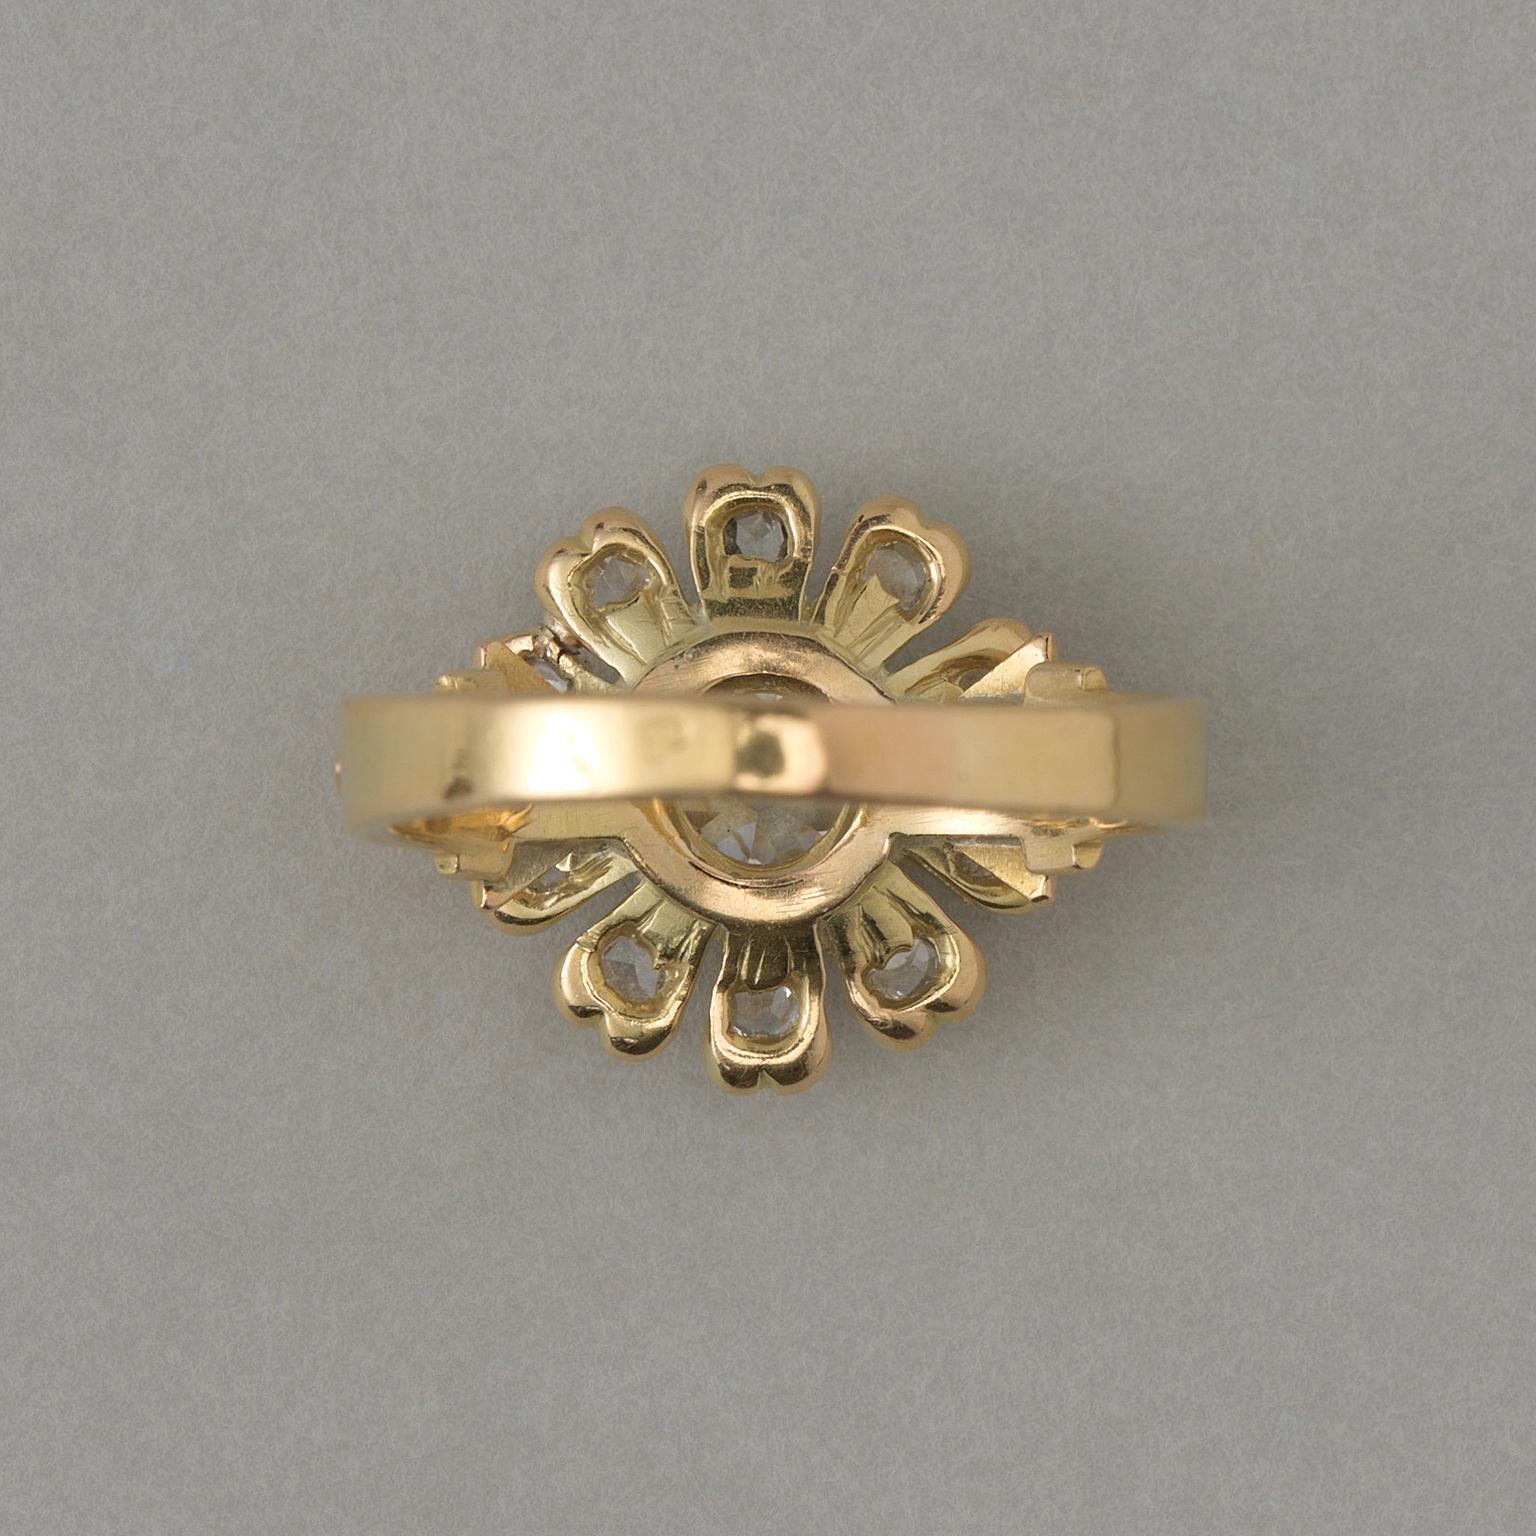 Edwardian Gold Flower Ring with Diamonds